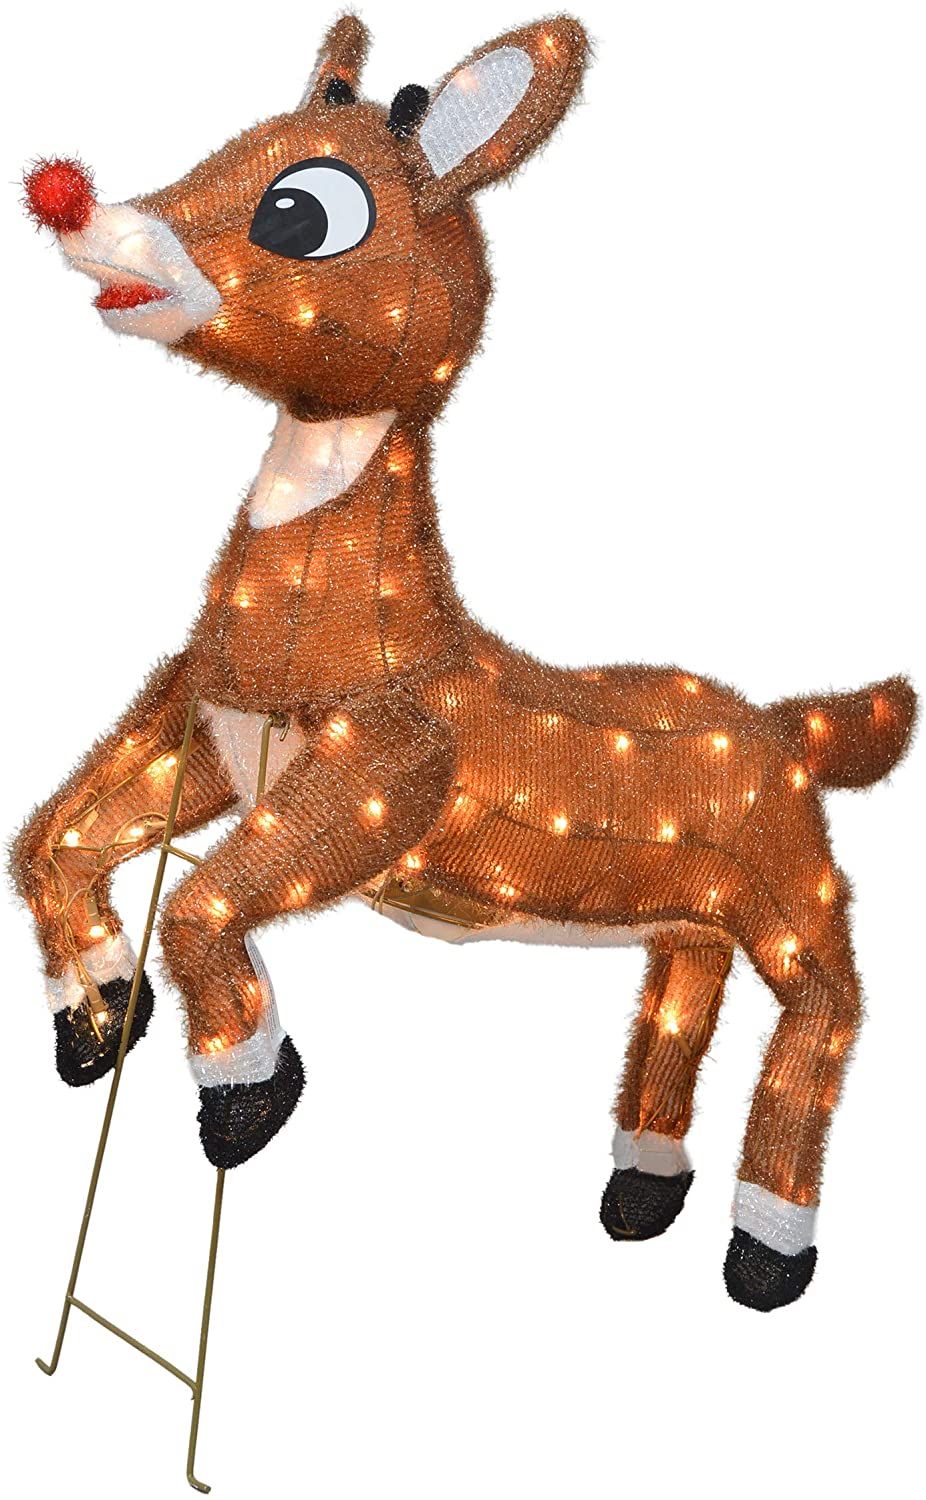 3D Rudolph The Red-Nosed Reindeer